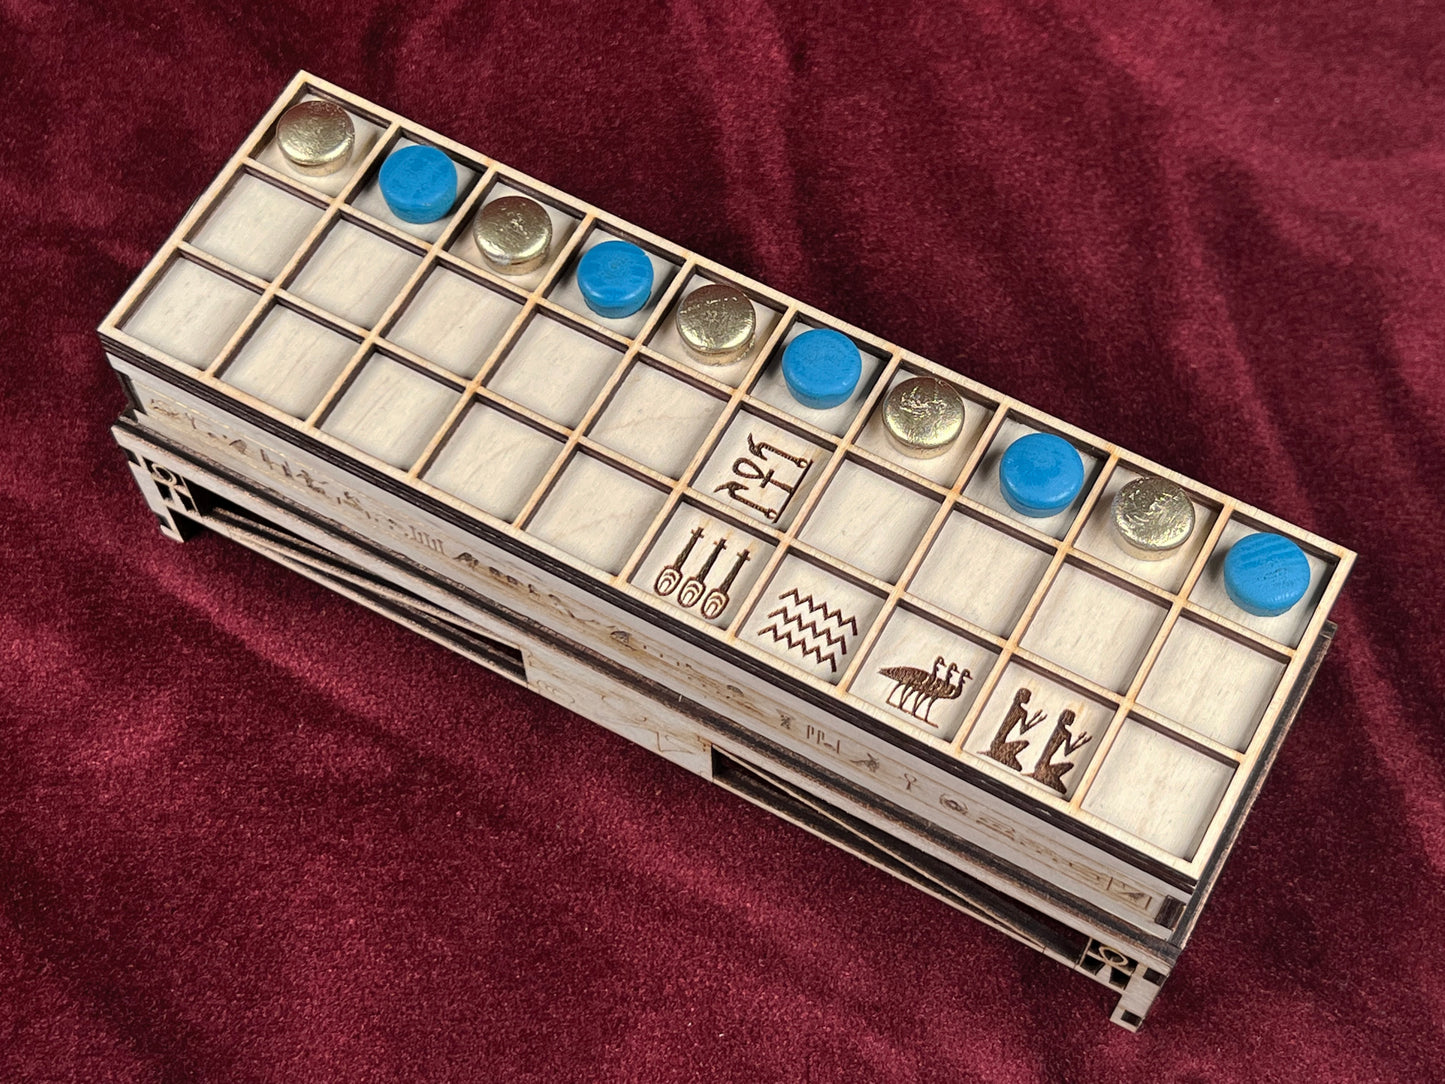 SENET - The Ancient Egyptian Board Game of the Pharaohs.